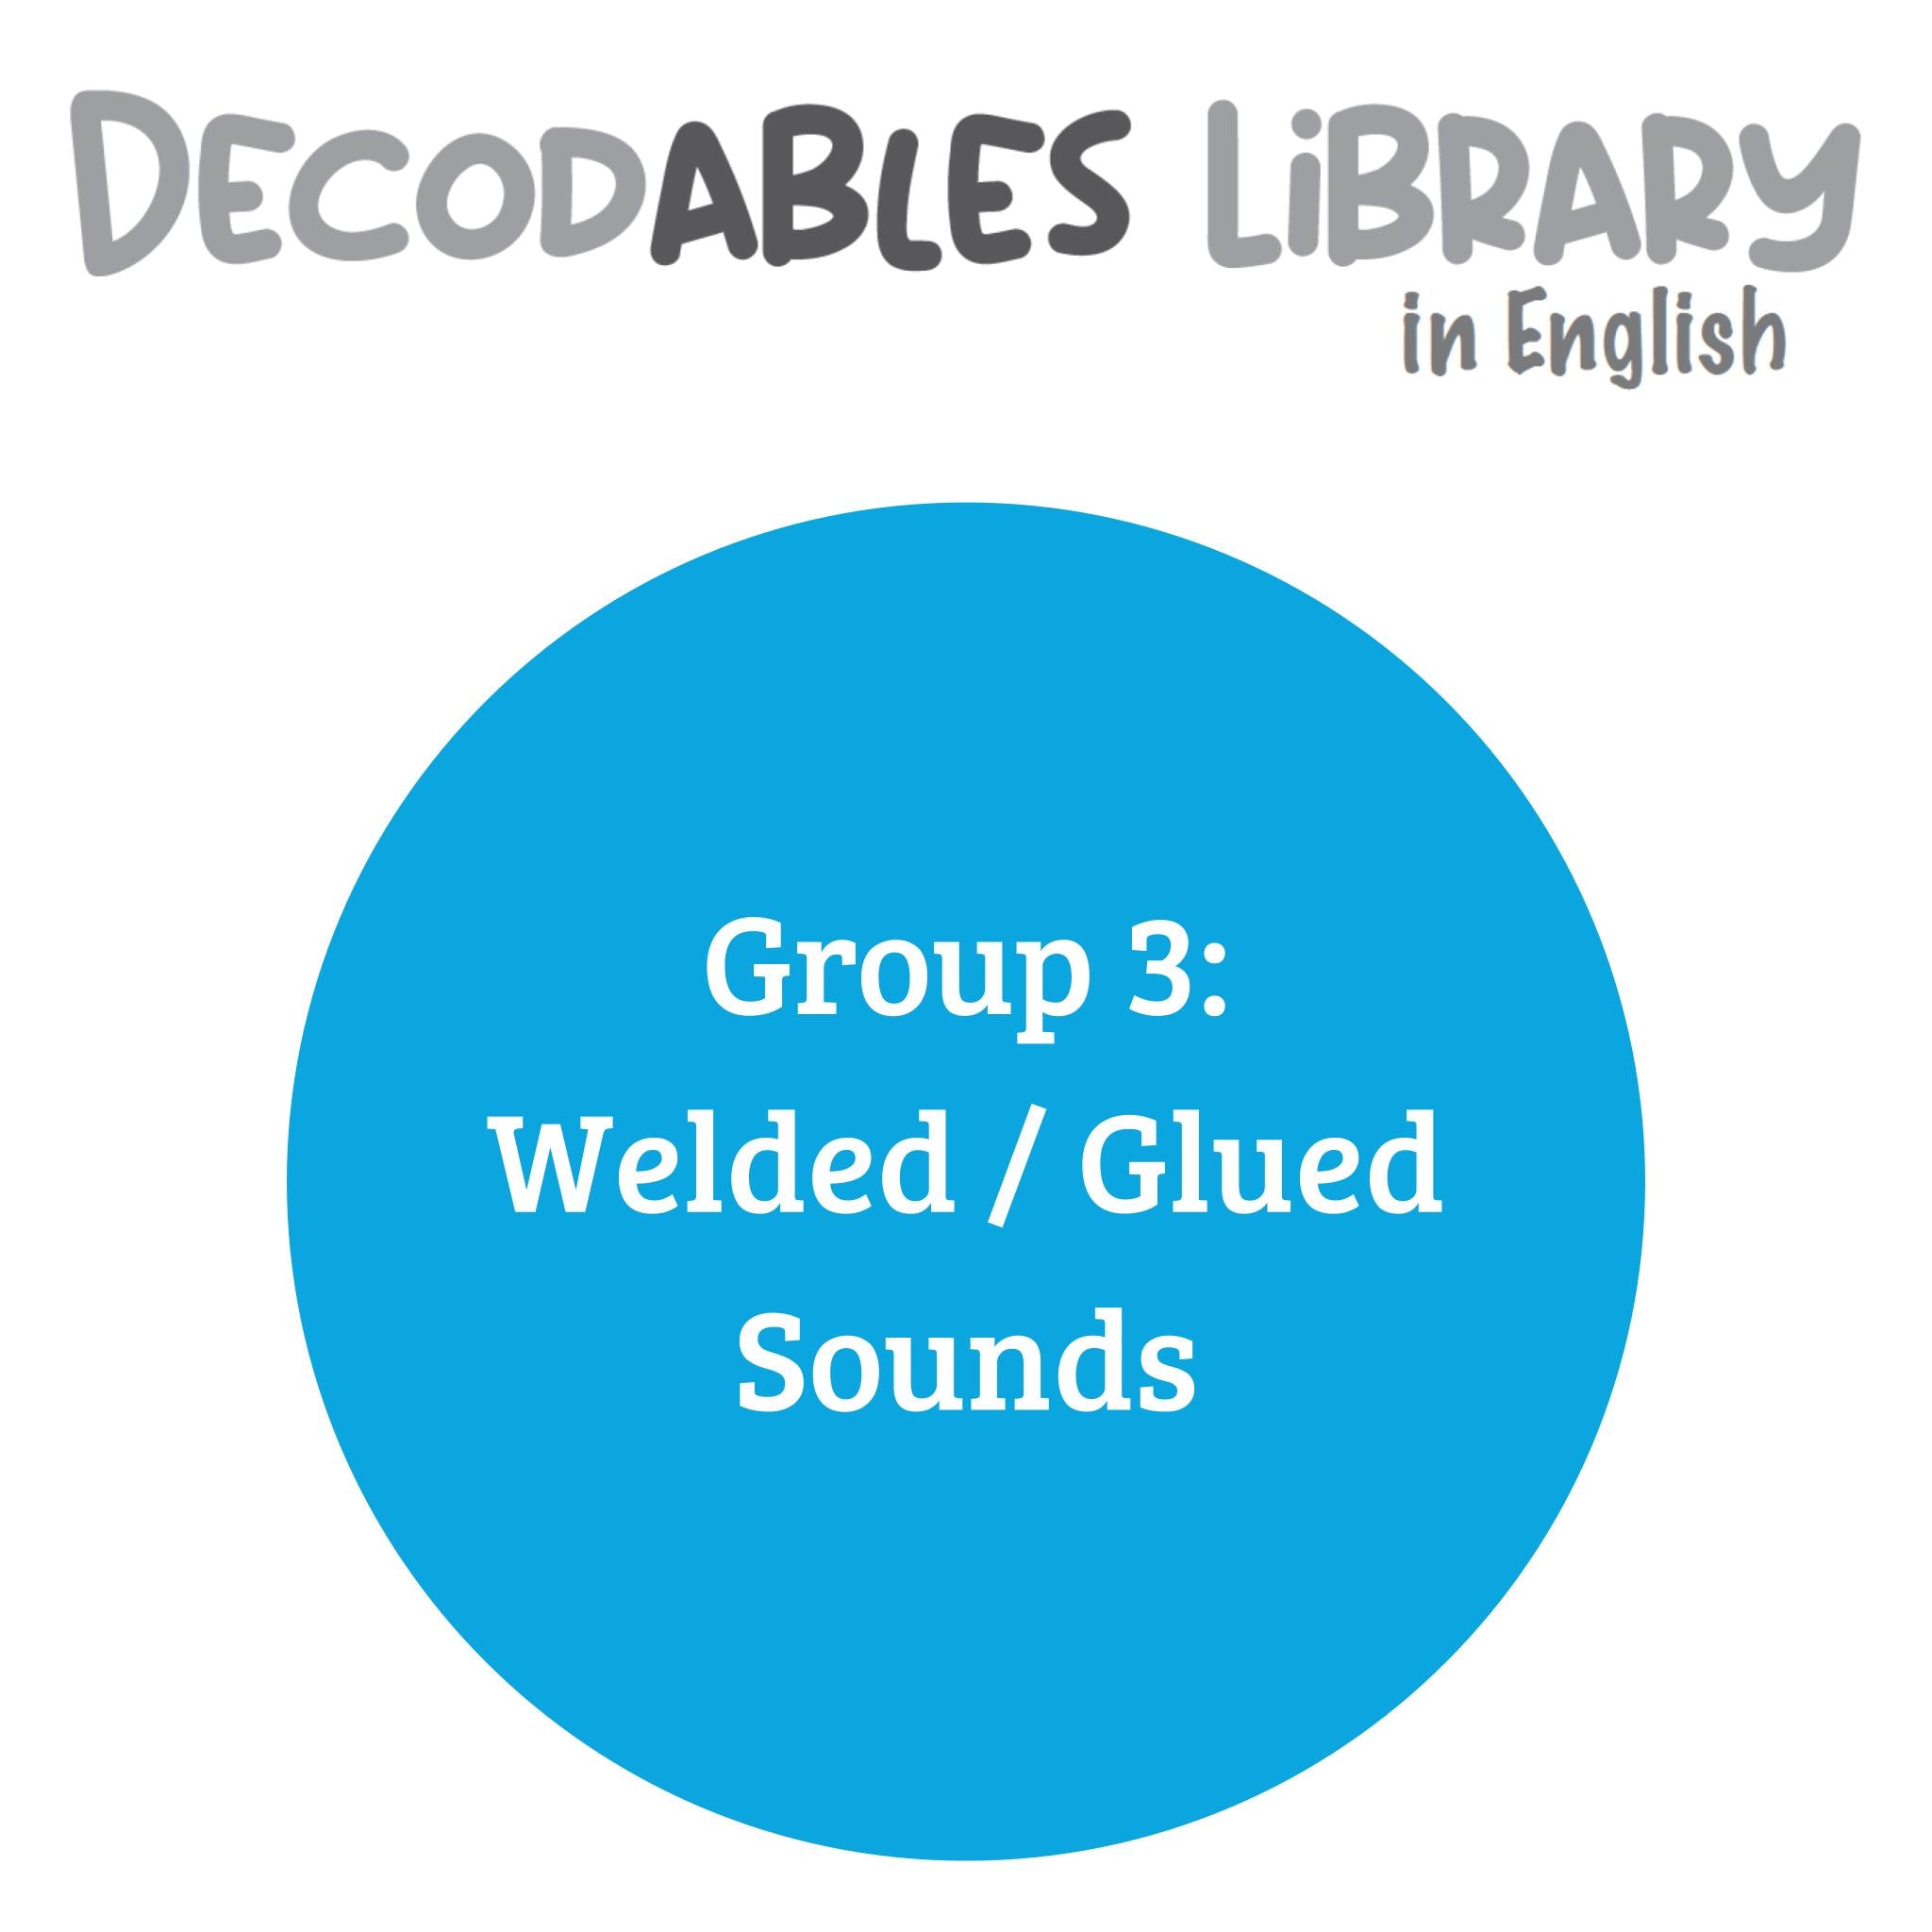 English Decodables Library - Group 3: Welded / Glued Sounds (set of 33 titles)